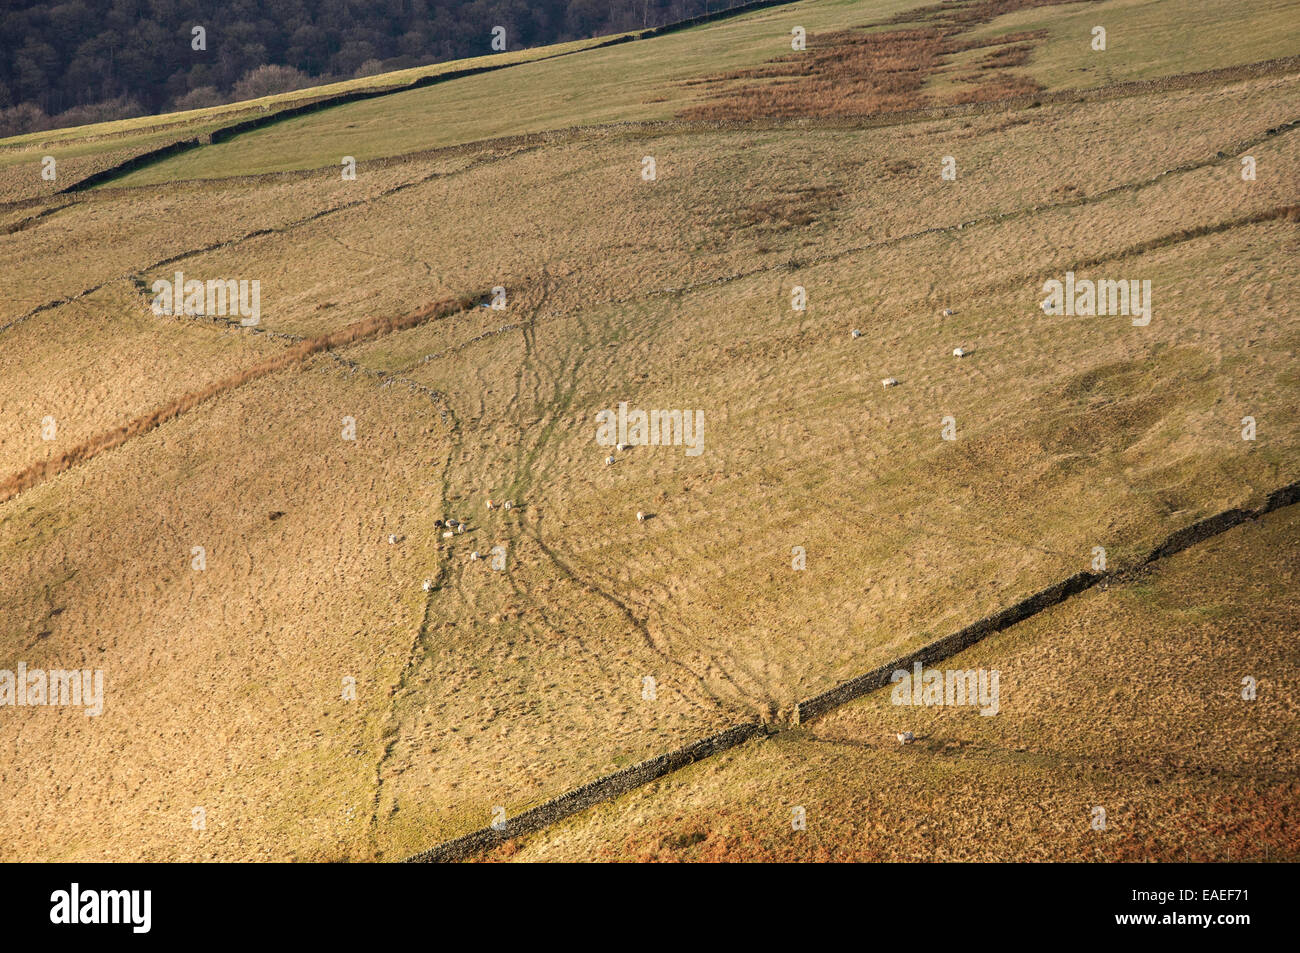 Sheep on a Hillside in the Peak District. Abstract image looking across at the hillside with track across the ground. Stock Photo